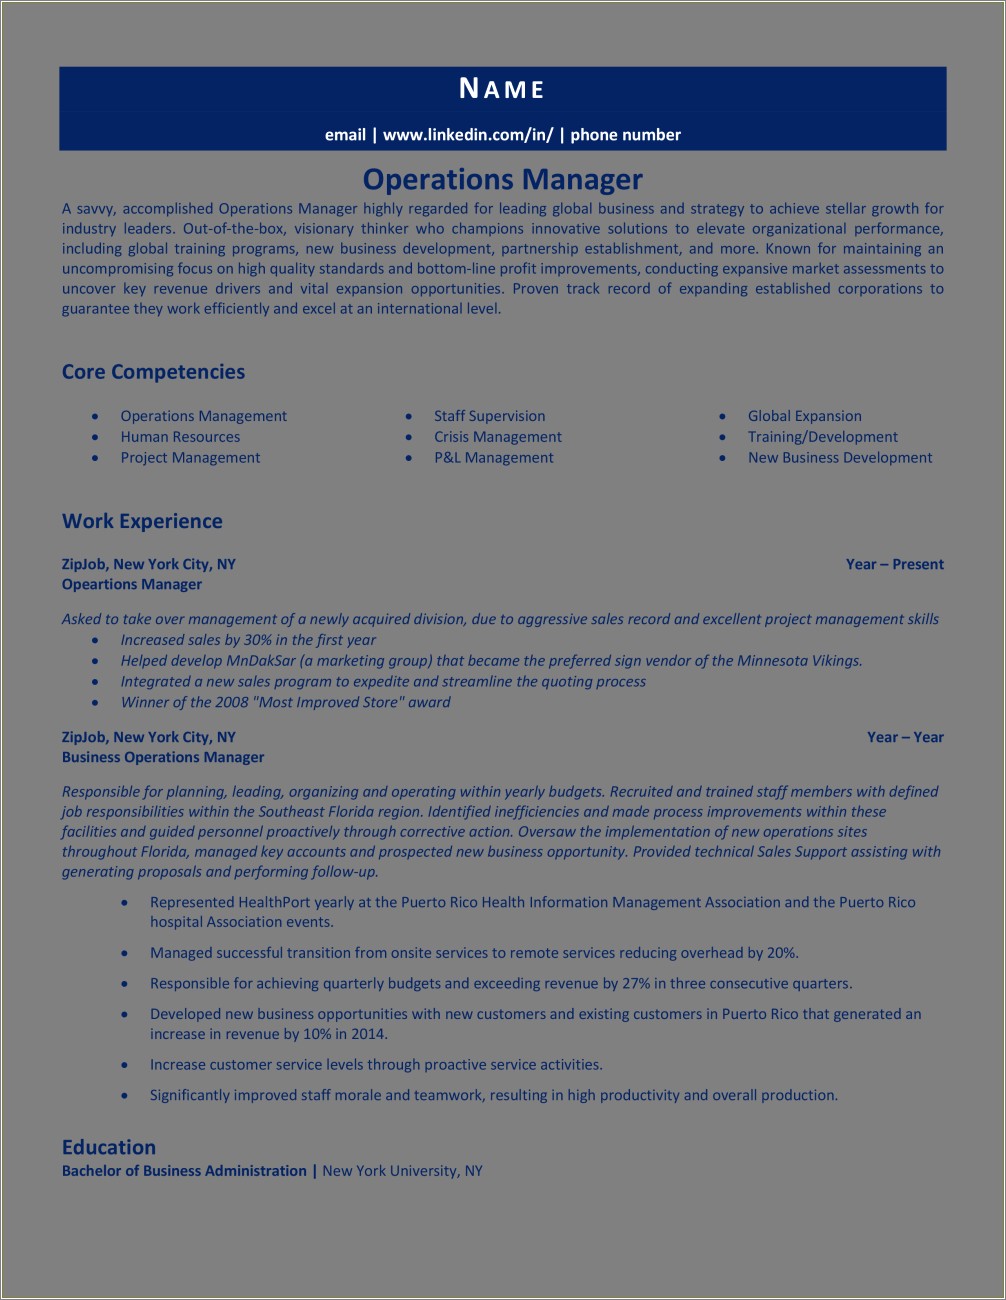 Best Resume Title For Operations Manager